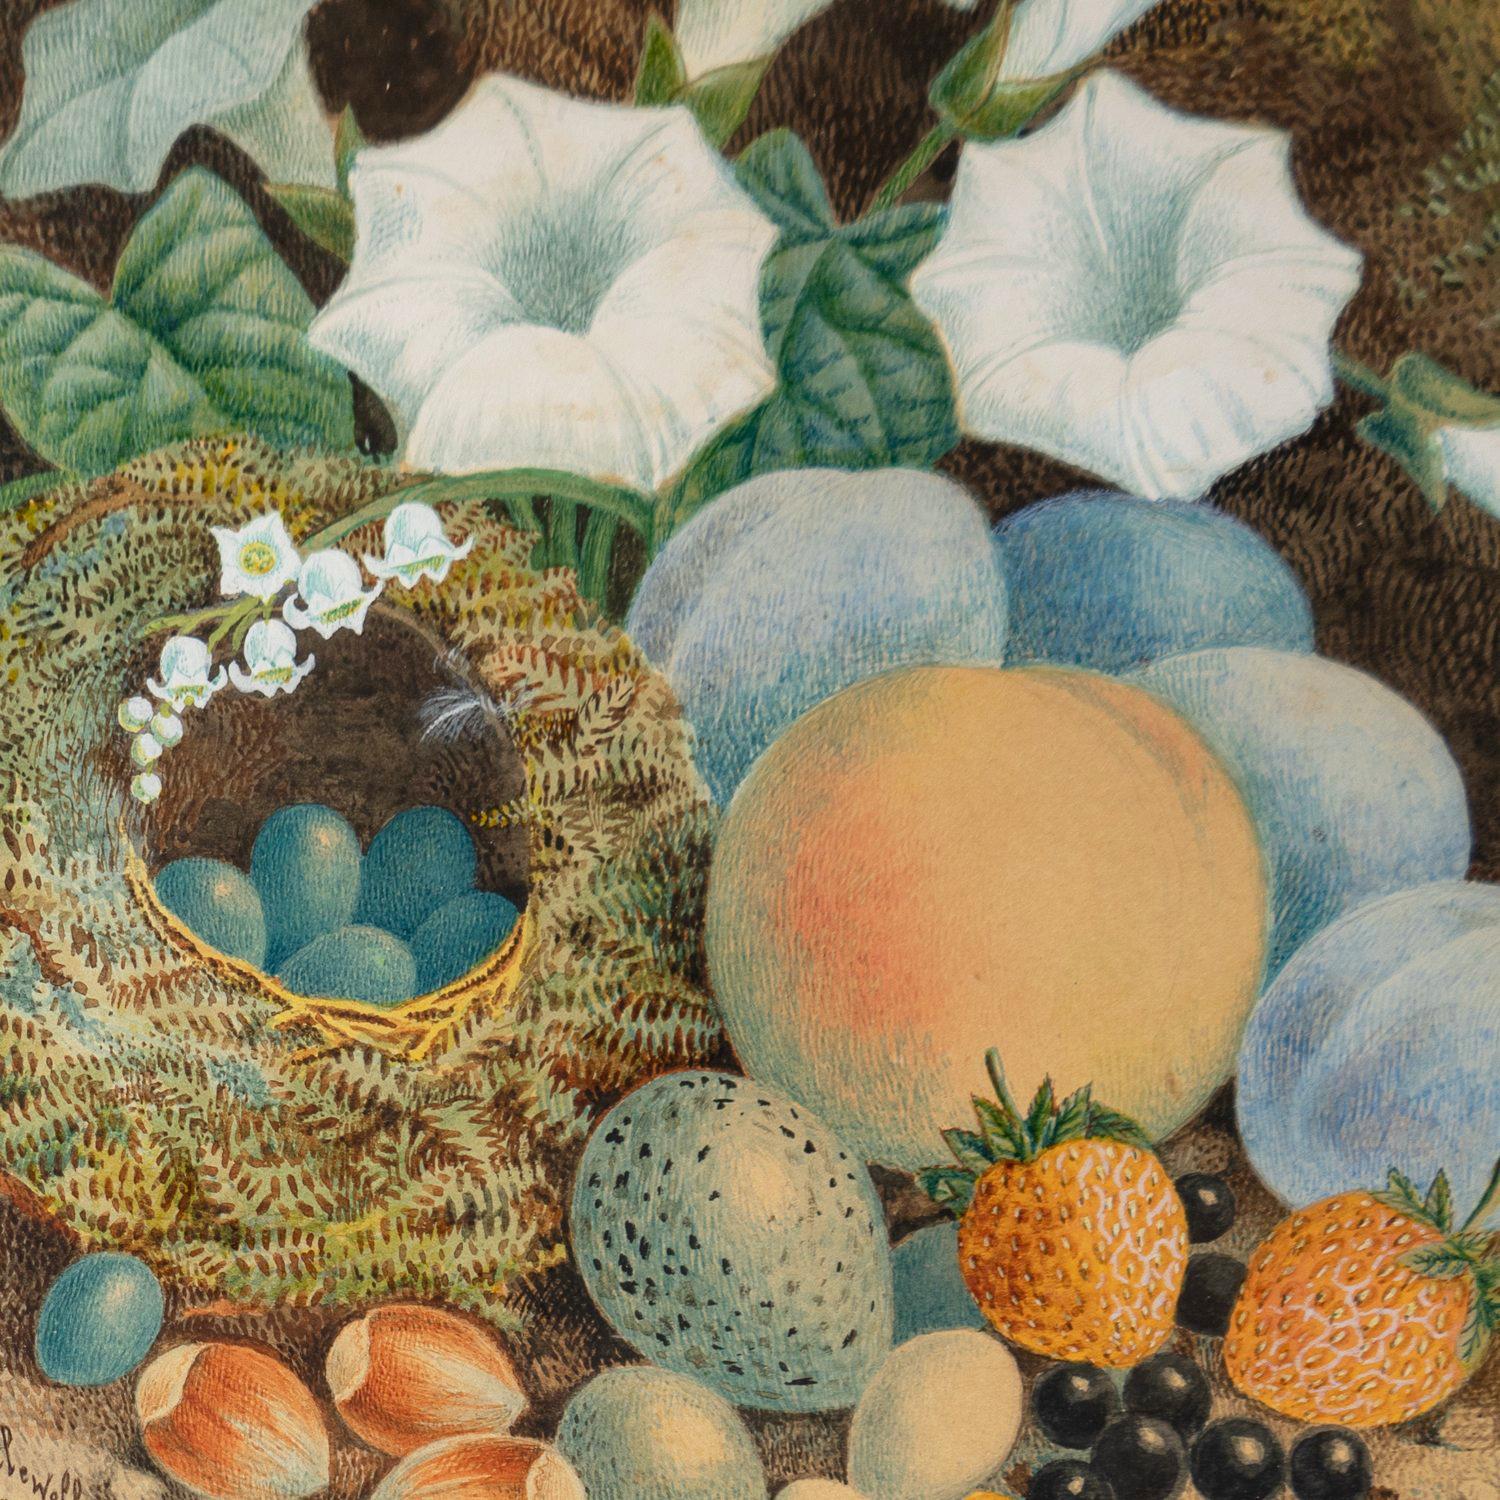 Paper Still Life Painting Of Birds Nest With Eggs, Fruit & Flowers By J. W. Kettlewell For Sale